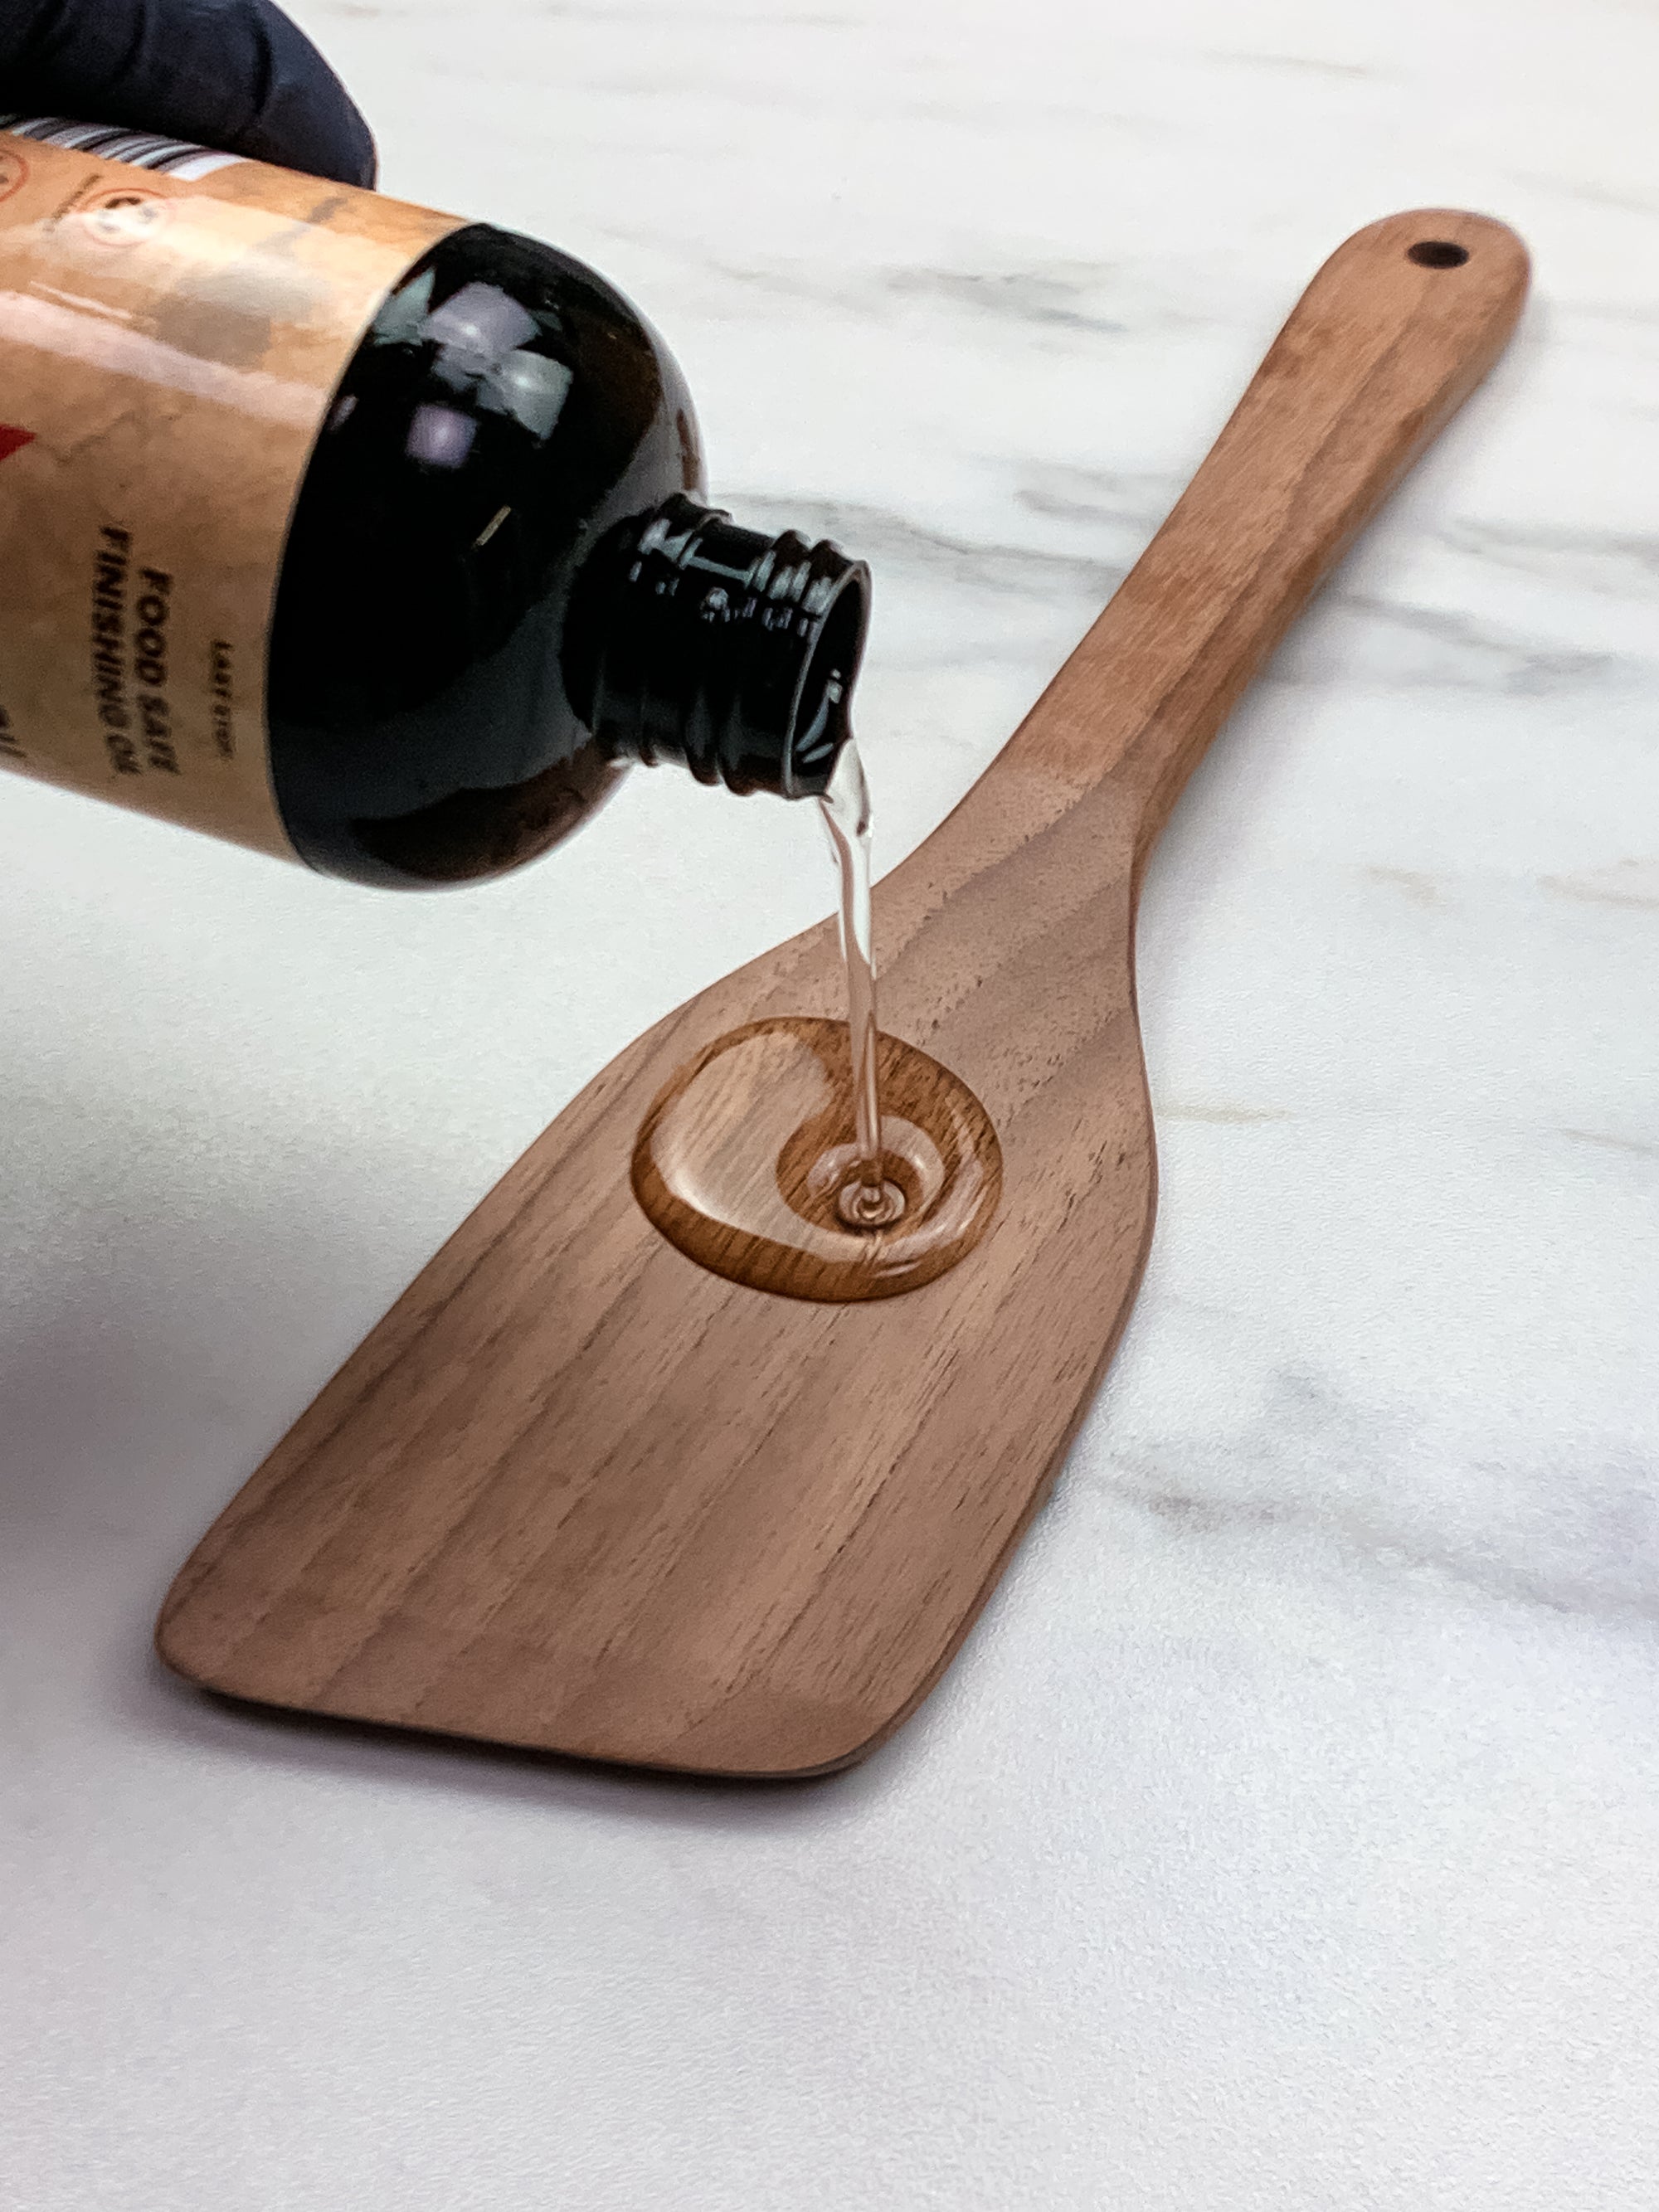 How To Oil Wood Cutting Boards and Spoons